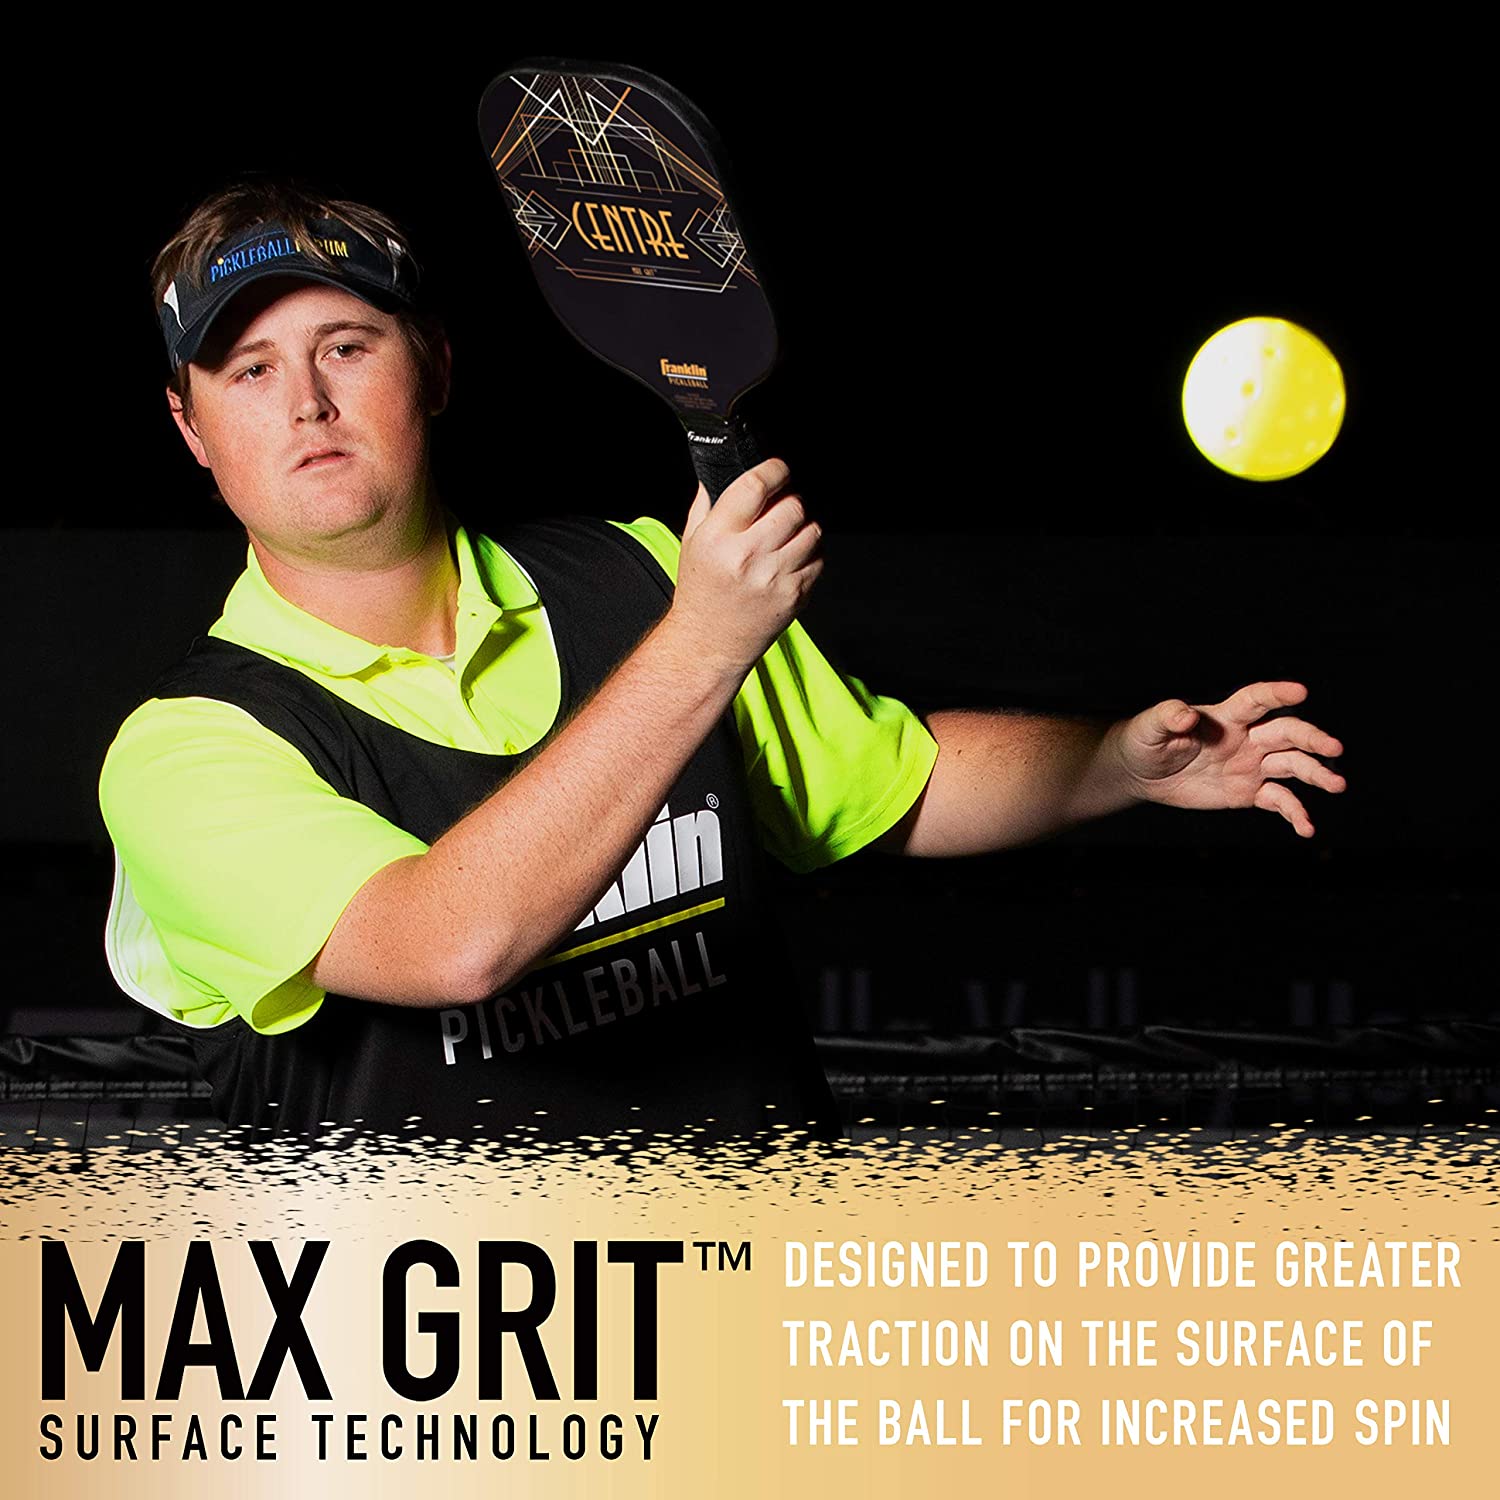 A man holding a Franklin Aspen Kern Centre Carbon Fiber Pickleball Paddle with the text "MaxGrit" indicating a high spin rate.